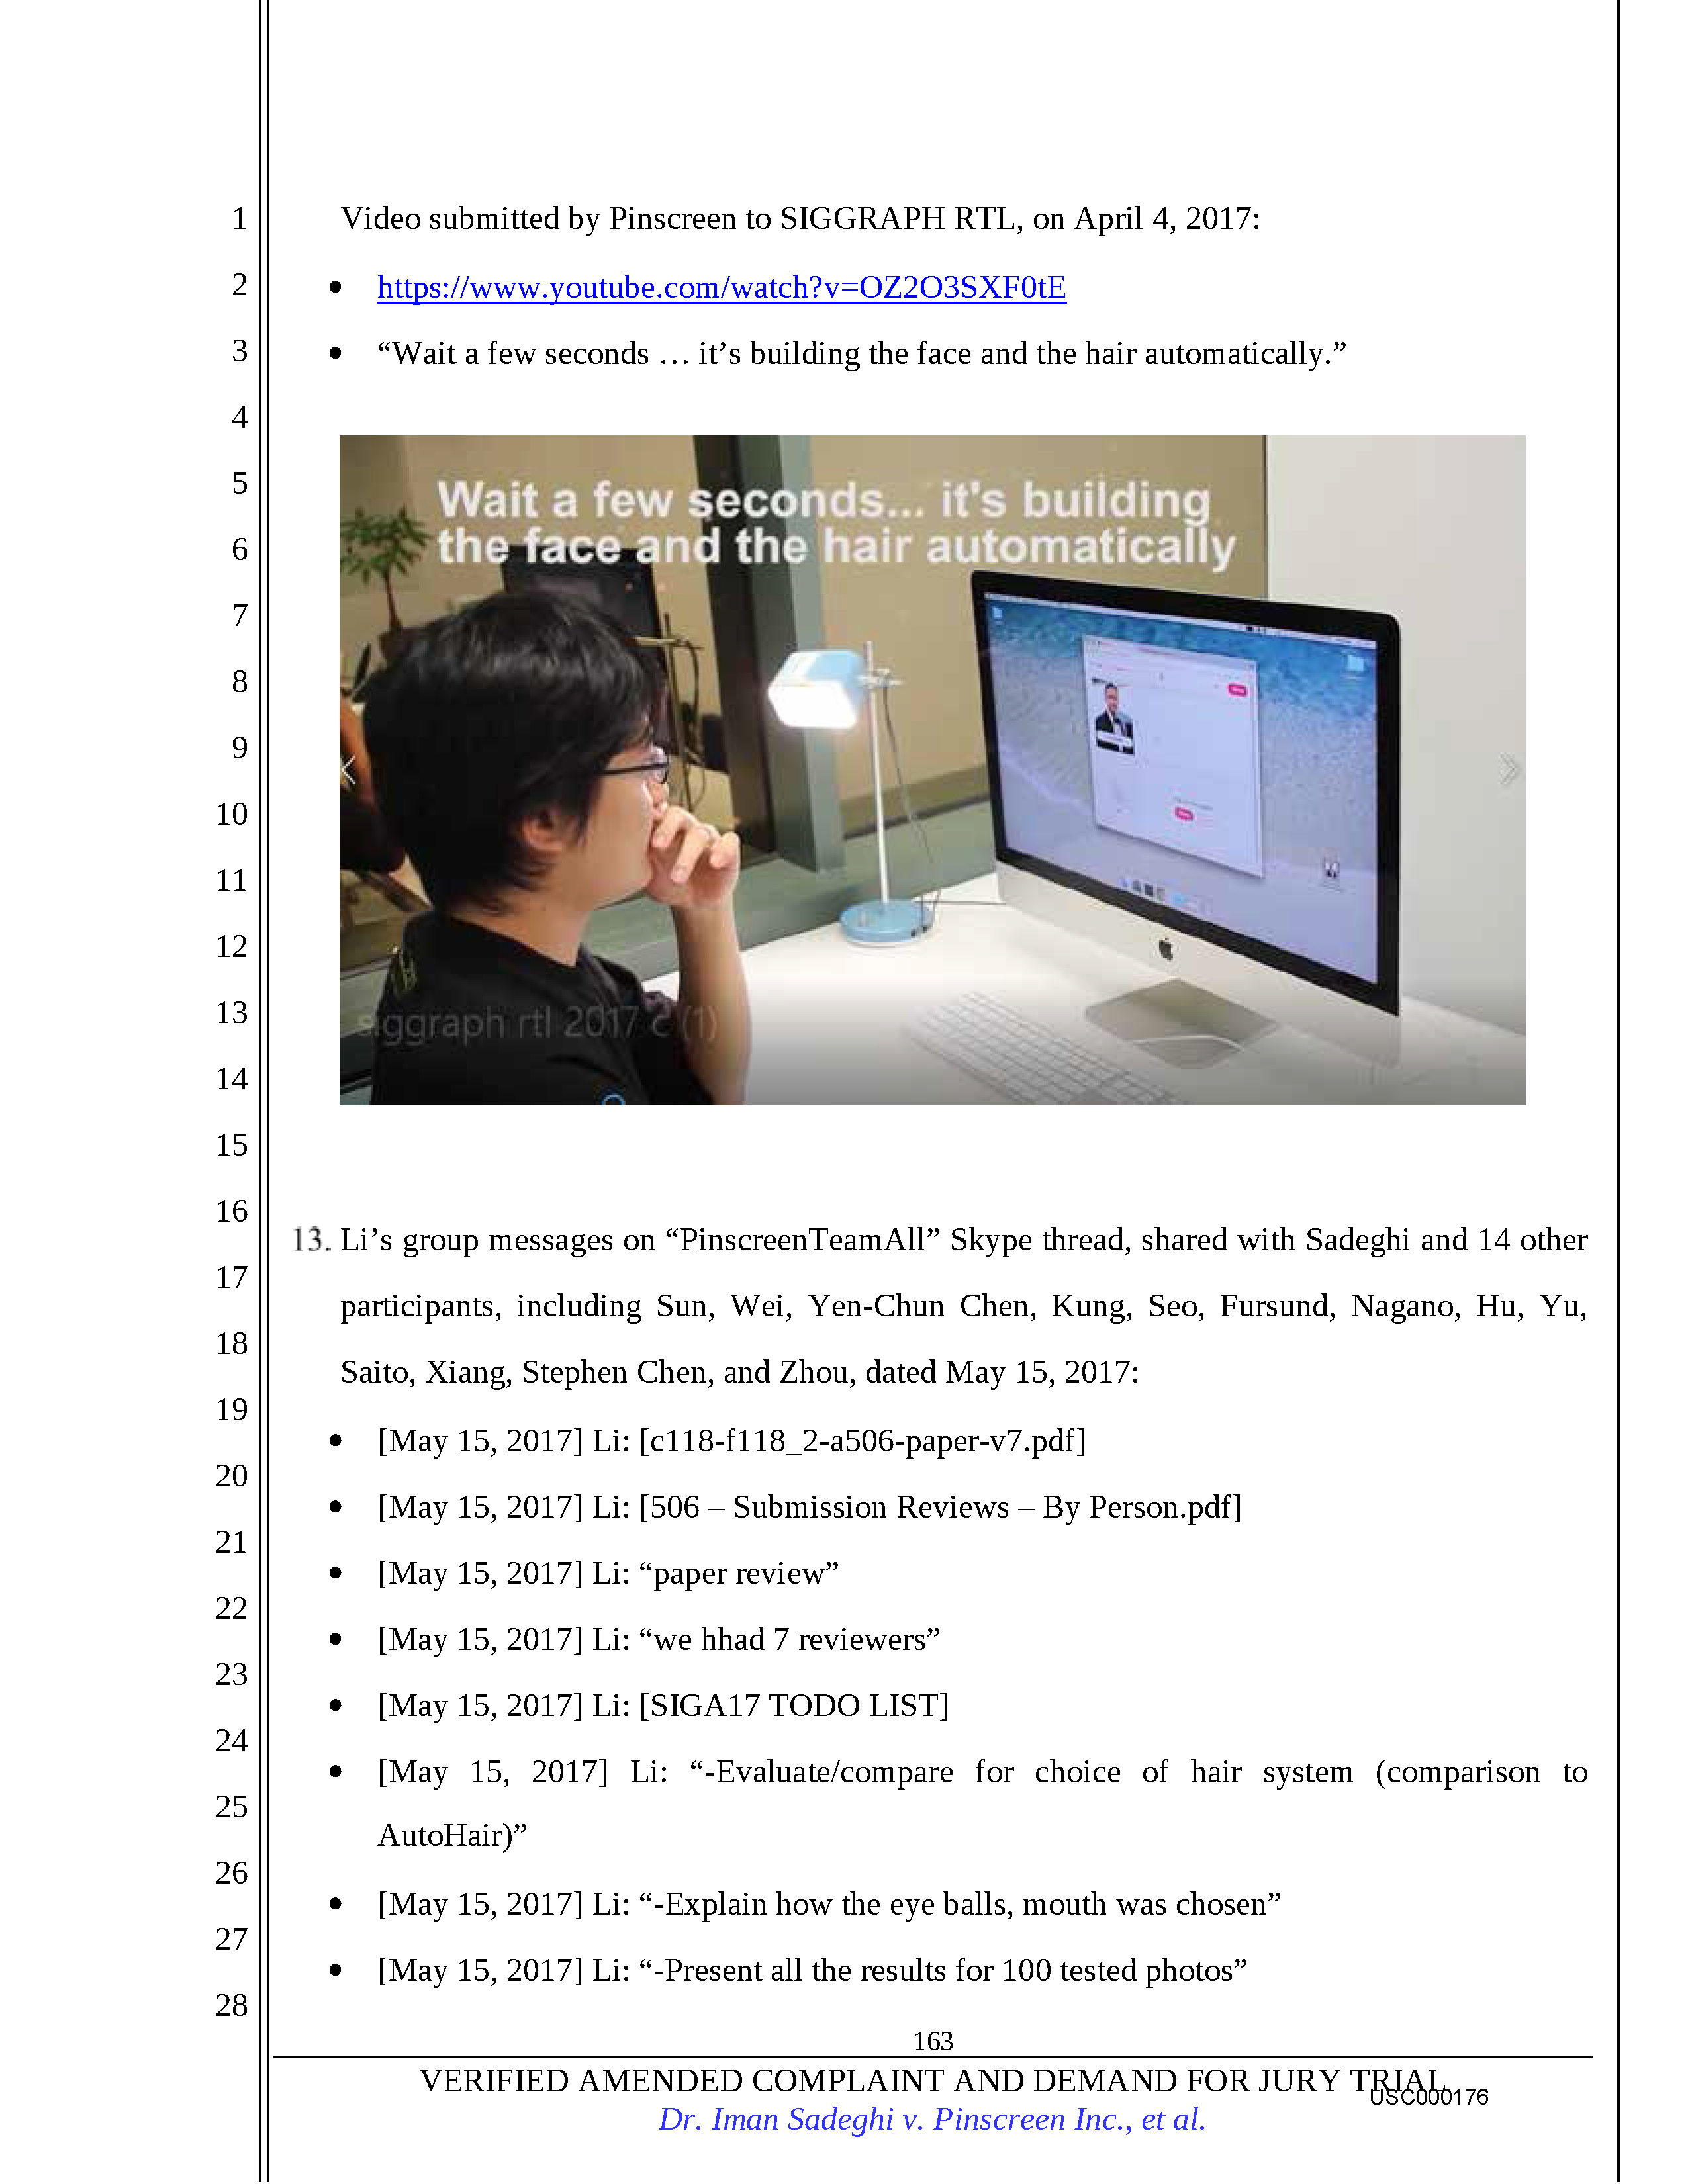 USC's Investigation Report re Hao Li's and Pinscreen's Scientific Misconduct at ACM SIGGRAPH RTL 2017 - Full Report Page 178